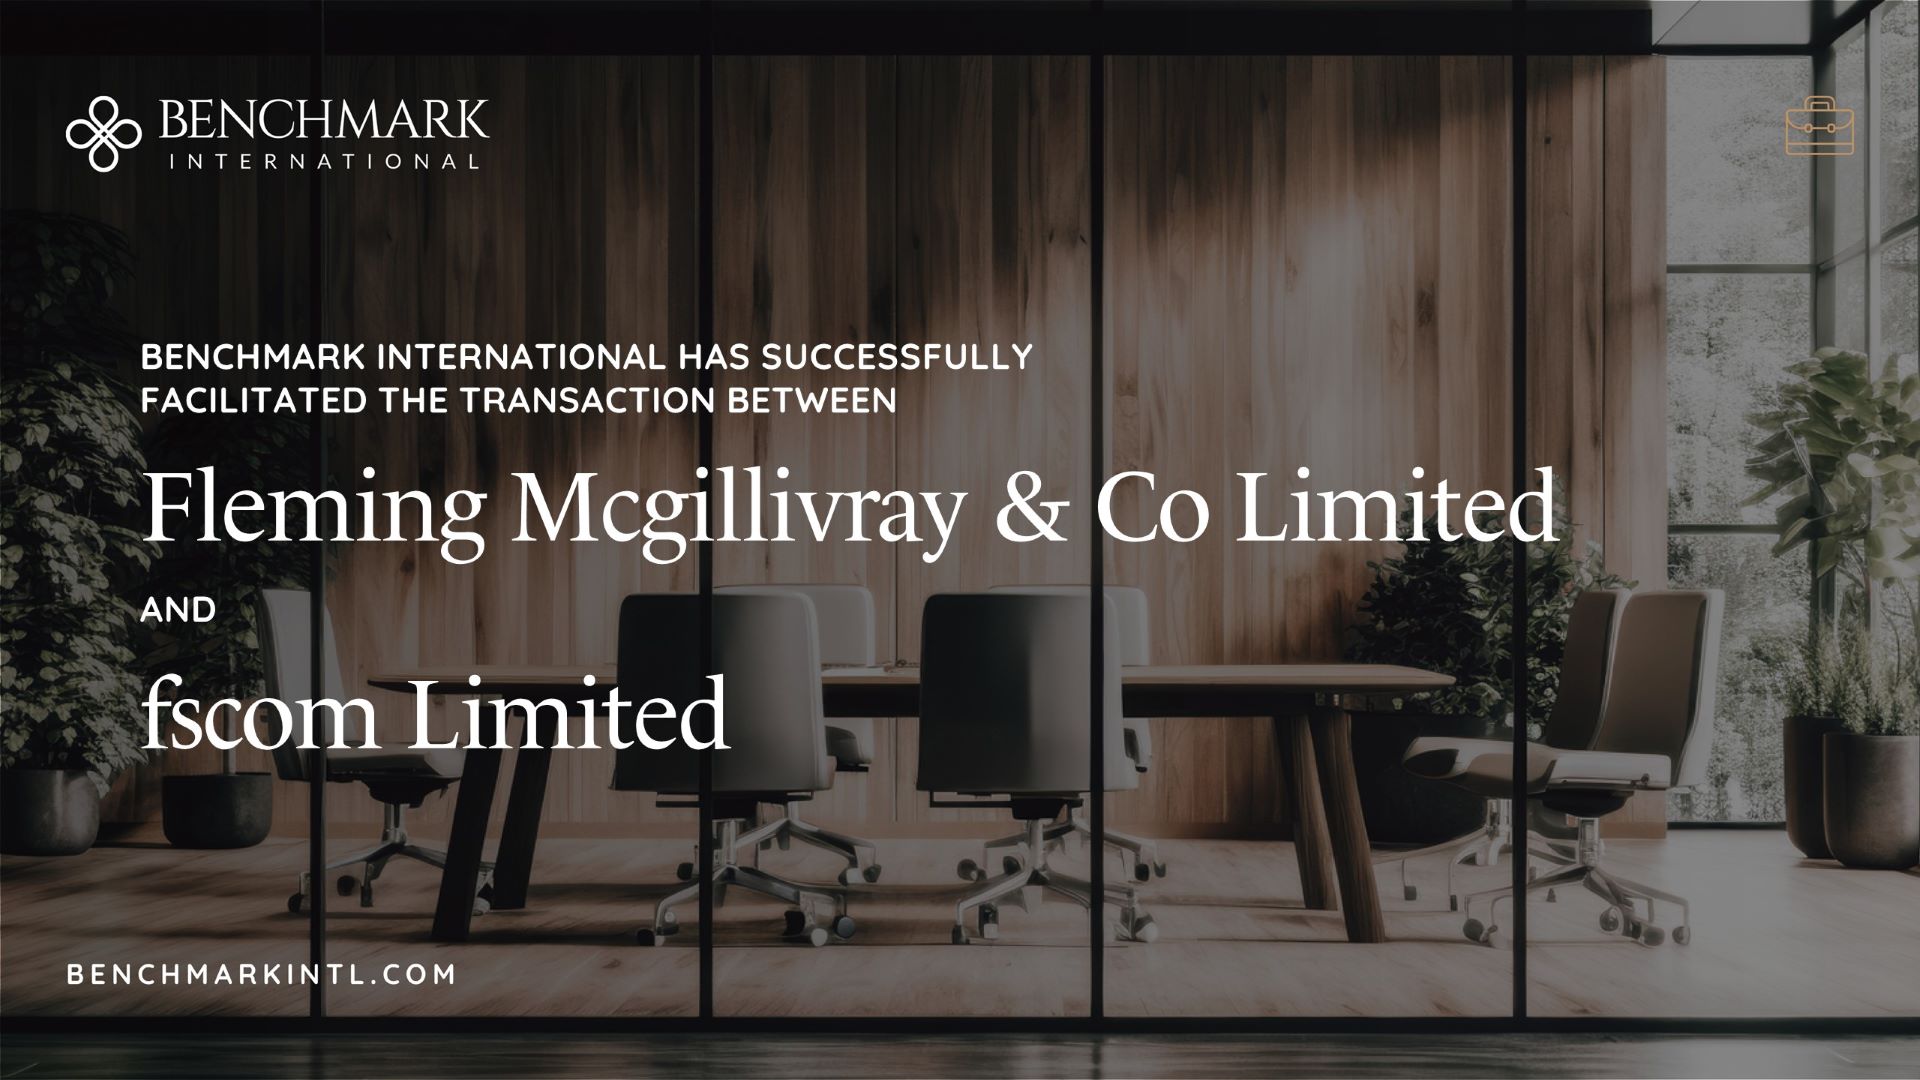 Benchmark International Successfully Facilitated the Transaction Between Fleming Mcgillivray & Co Limited and fscom Limited